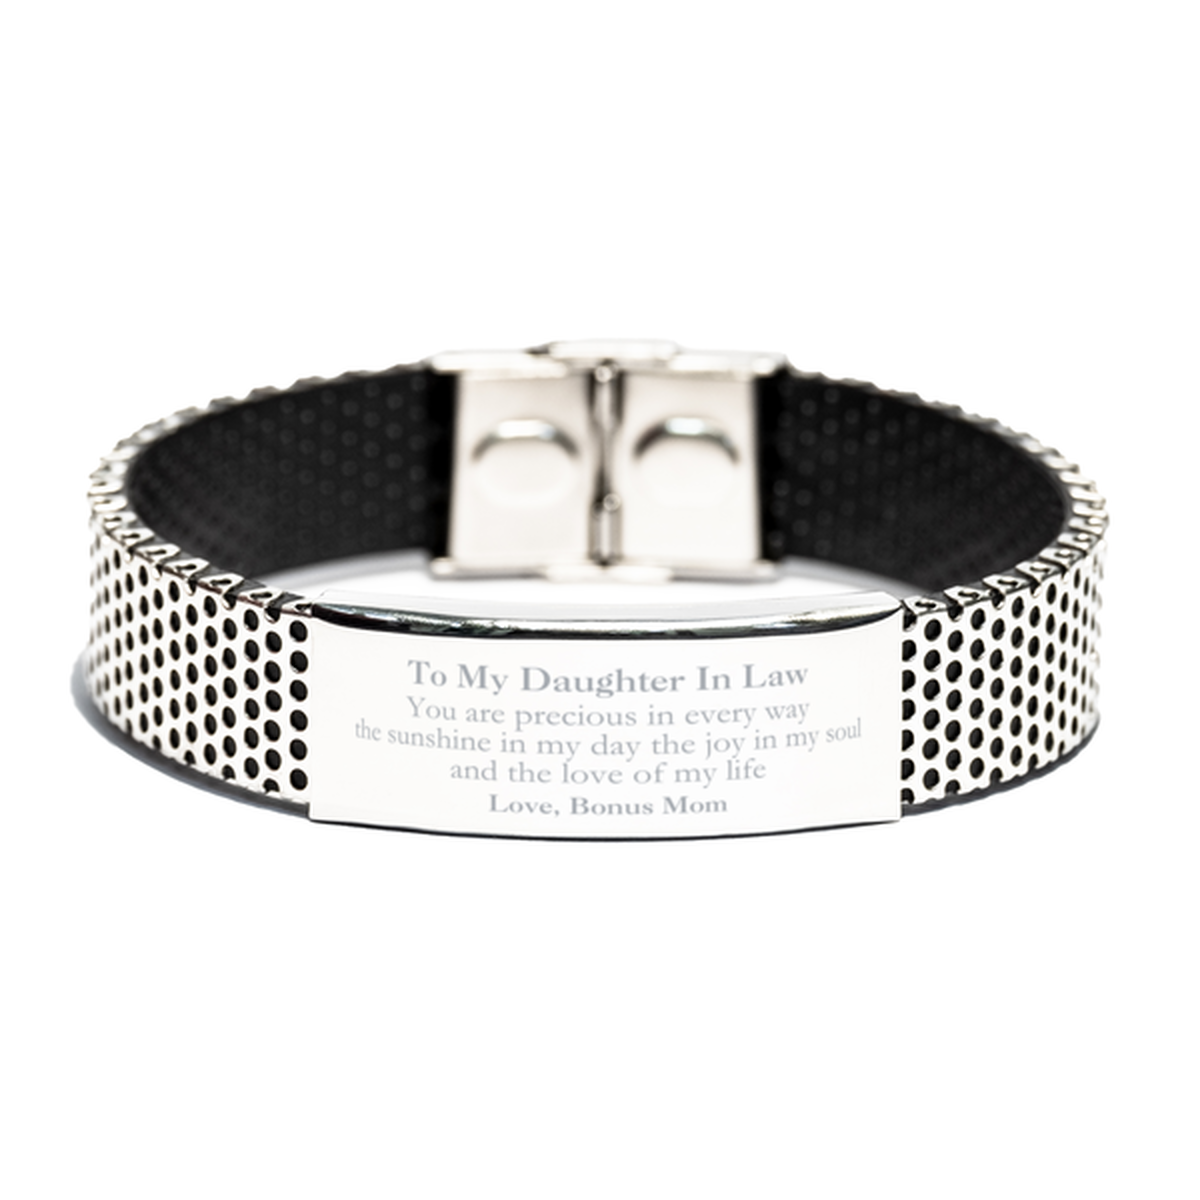 Graduation Gifts for Daughter In Law Stainless Steel Bracelet Present from Bonus Mom, Christmas Daughter In Law Birthday Gifts Daughter In Law You are precious in every way the sunshine in my day. Love, Bonus Mom